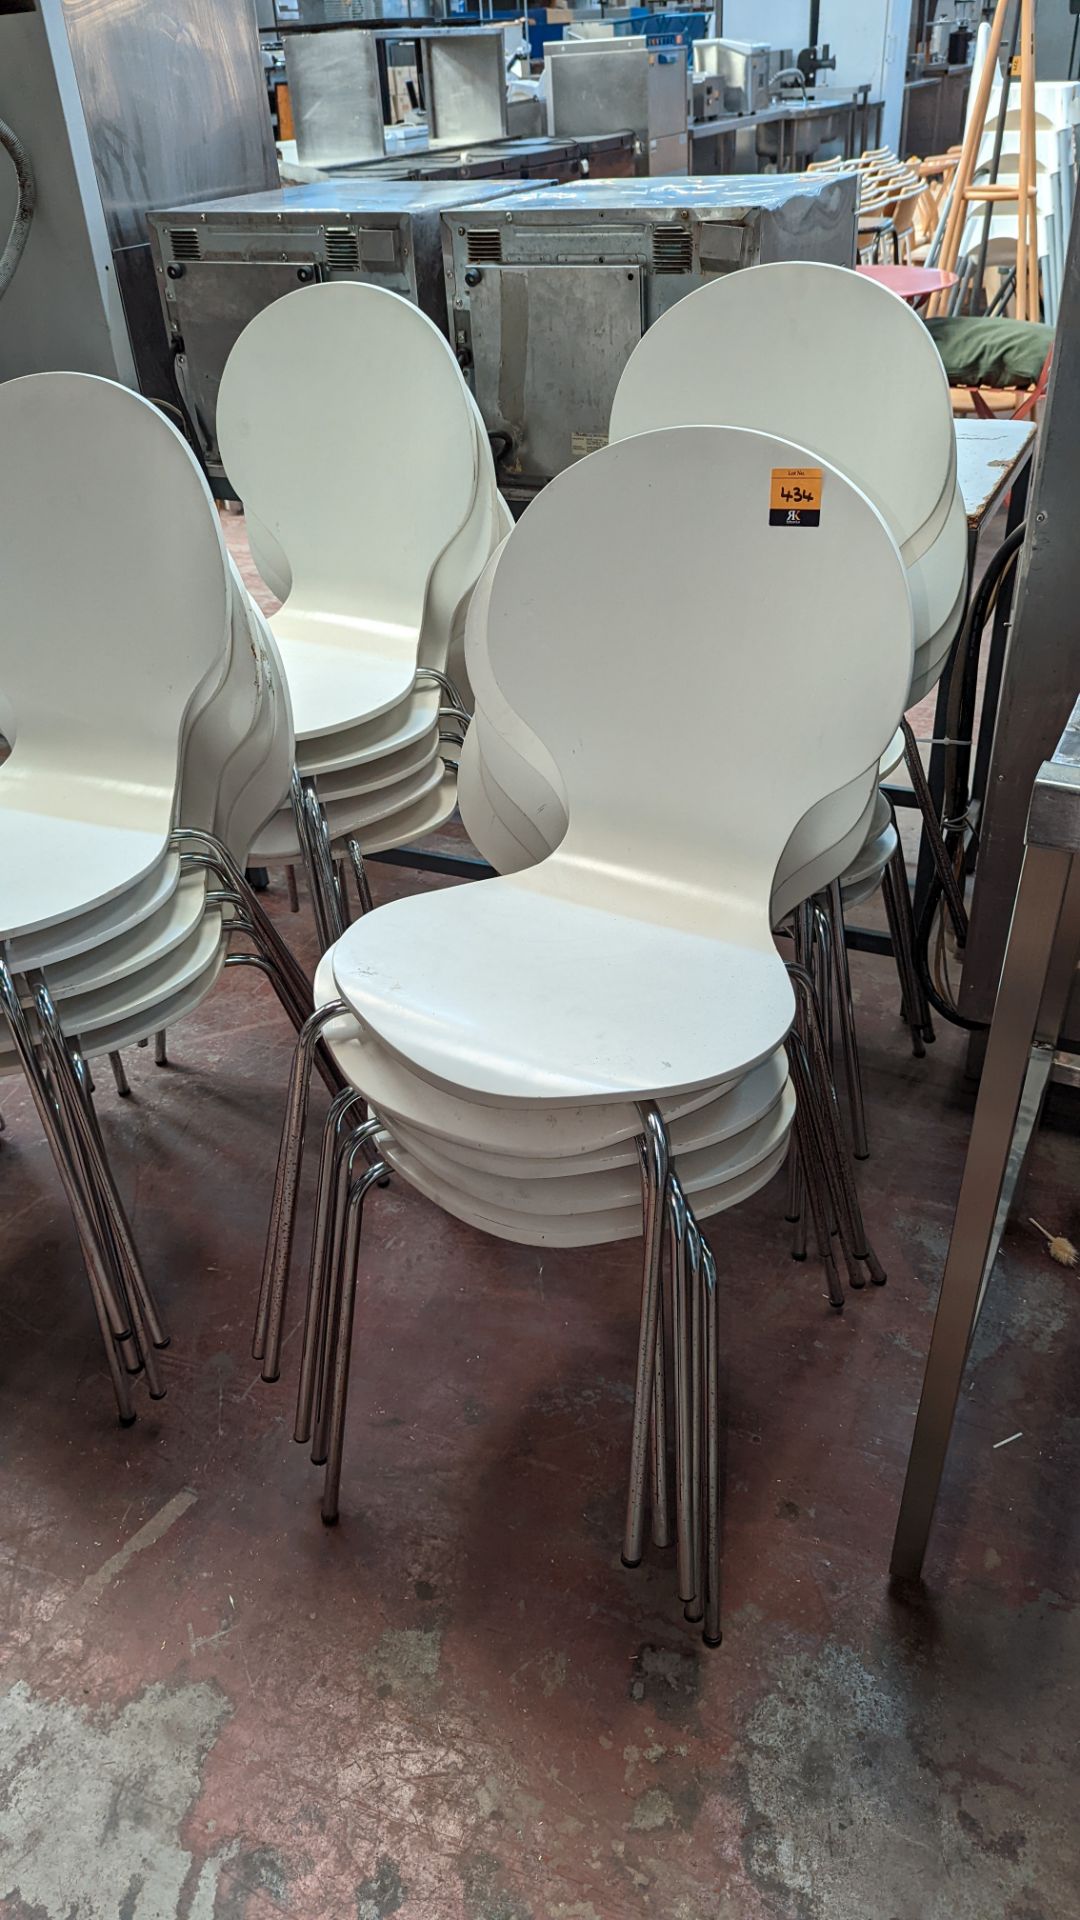 20 matching stacking chairs in white painted wood on chrome bases - Image 3 of 6